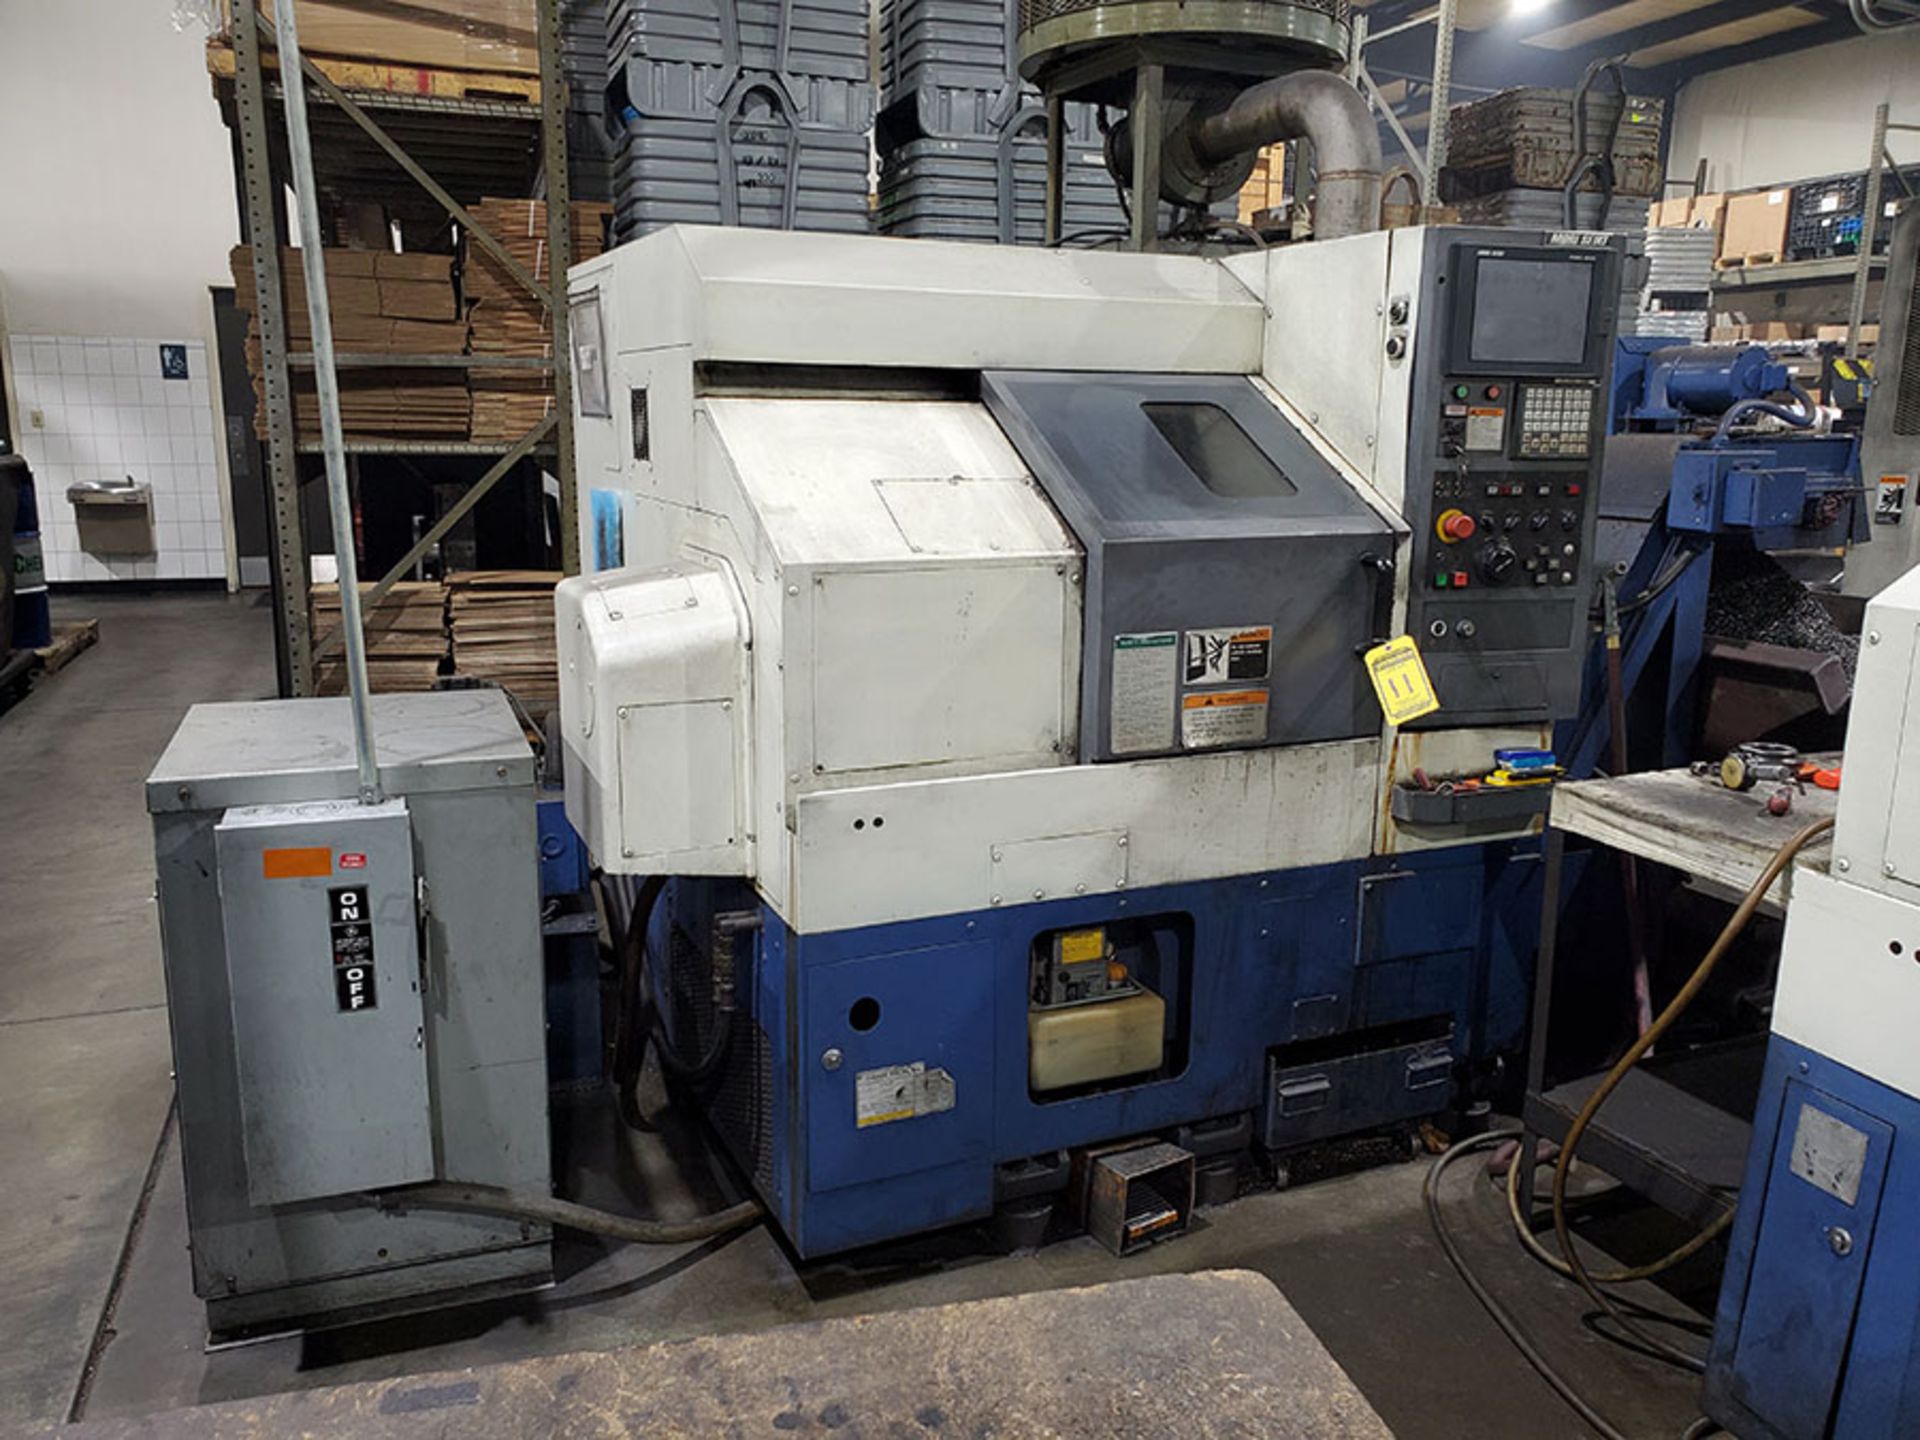 MORI-SEIKI CNC LATHE, MSC-803 DRO CNC CONTROL, MIST COLLECTOR, TURBO OUTFEED INCLINE CHIP - Image 16 of 16